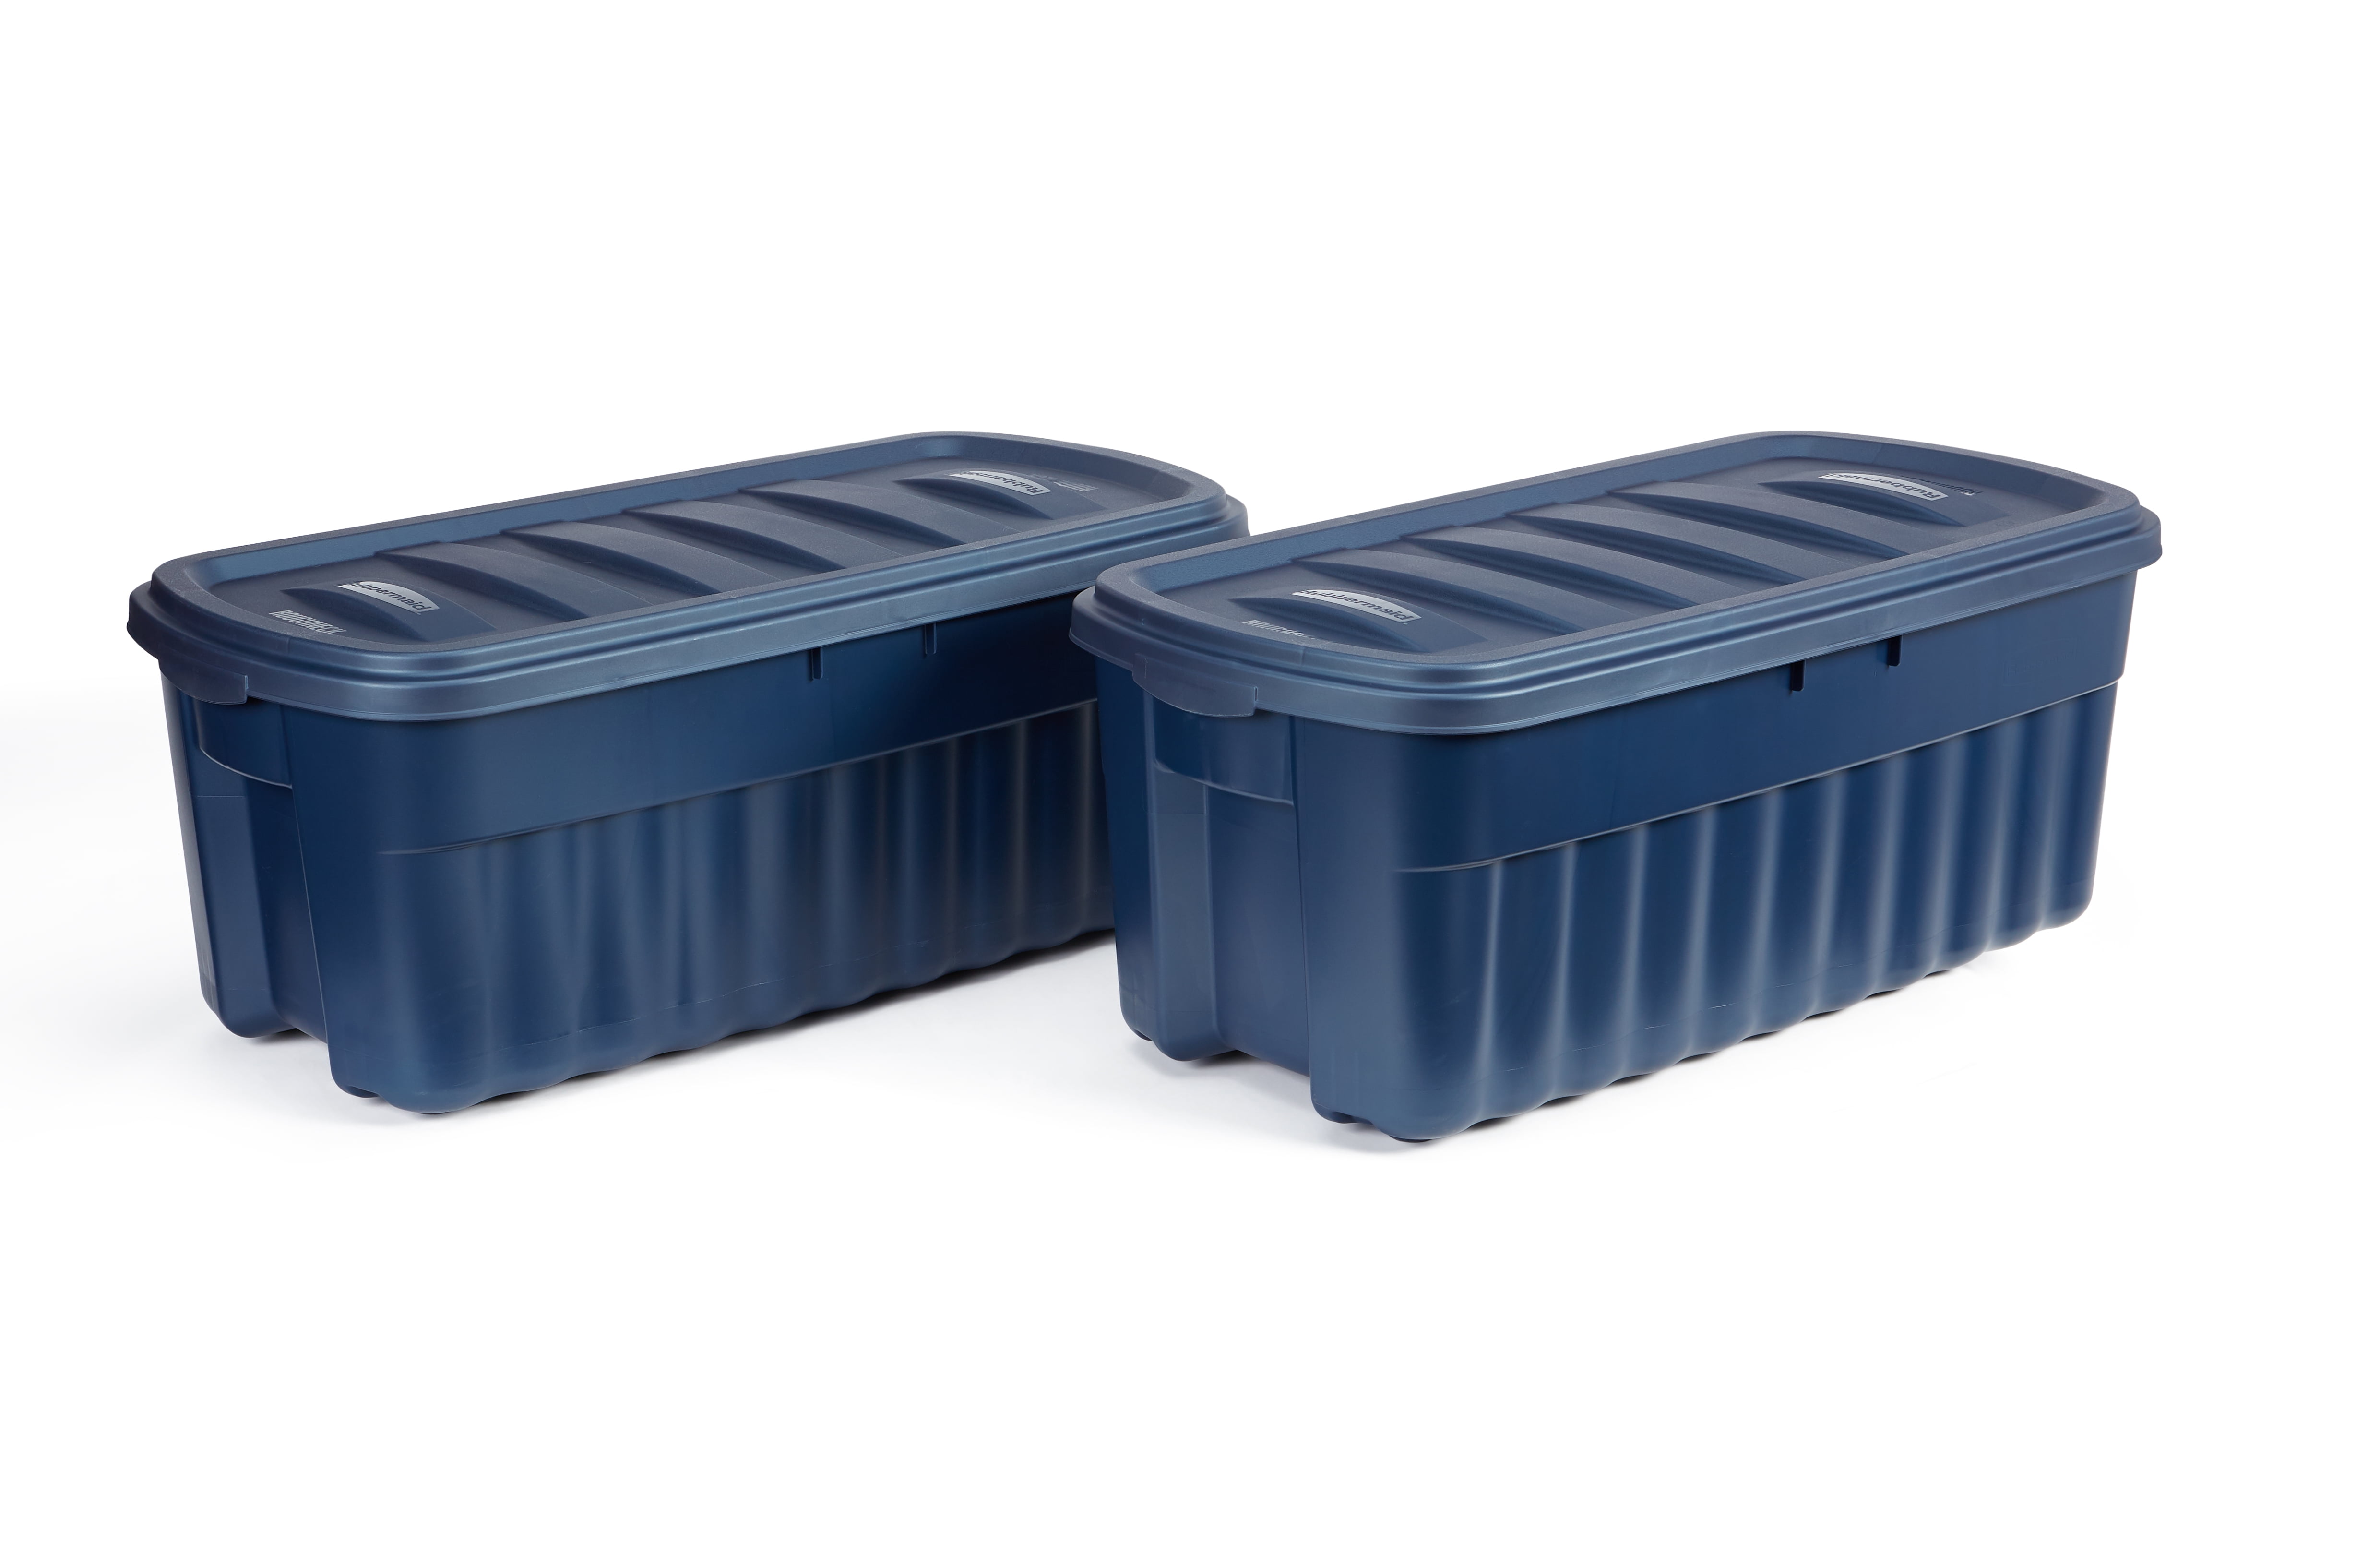 Rubbermaid Roughneck Tote 14 Gallon Storage Container, Heritage Blue (6 Pack)